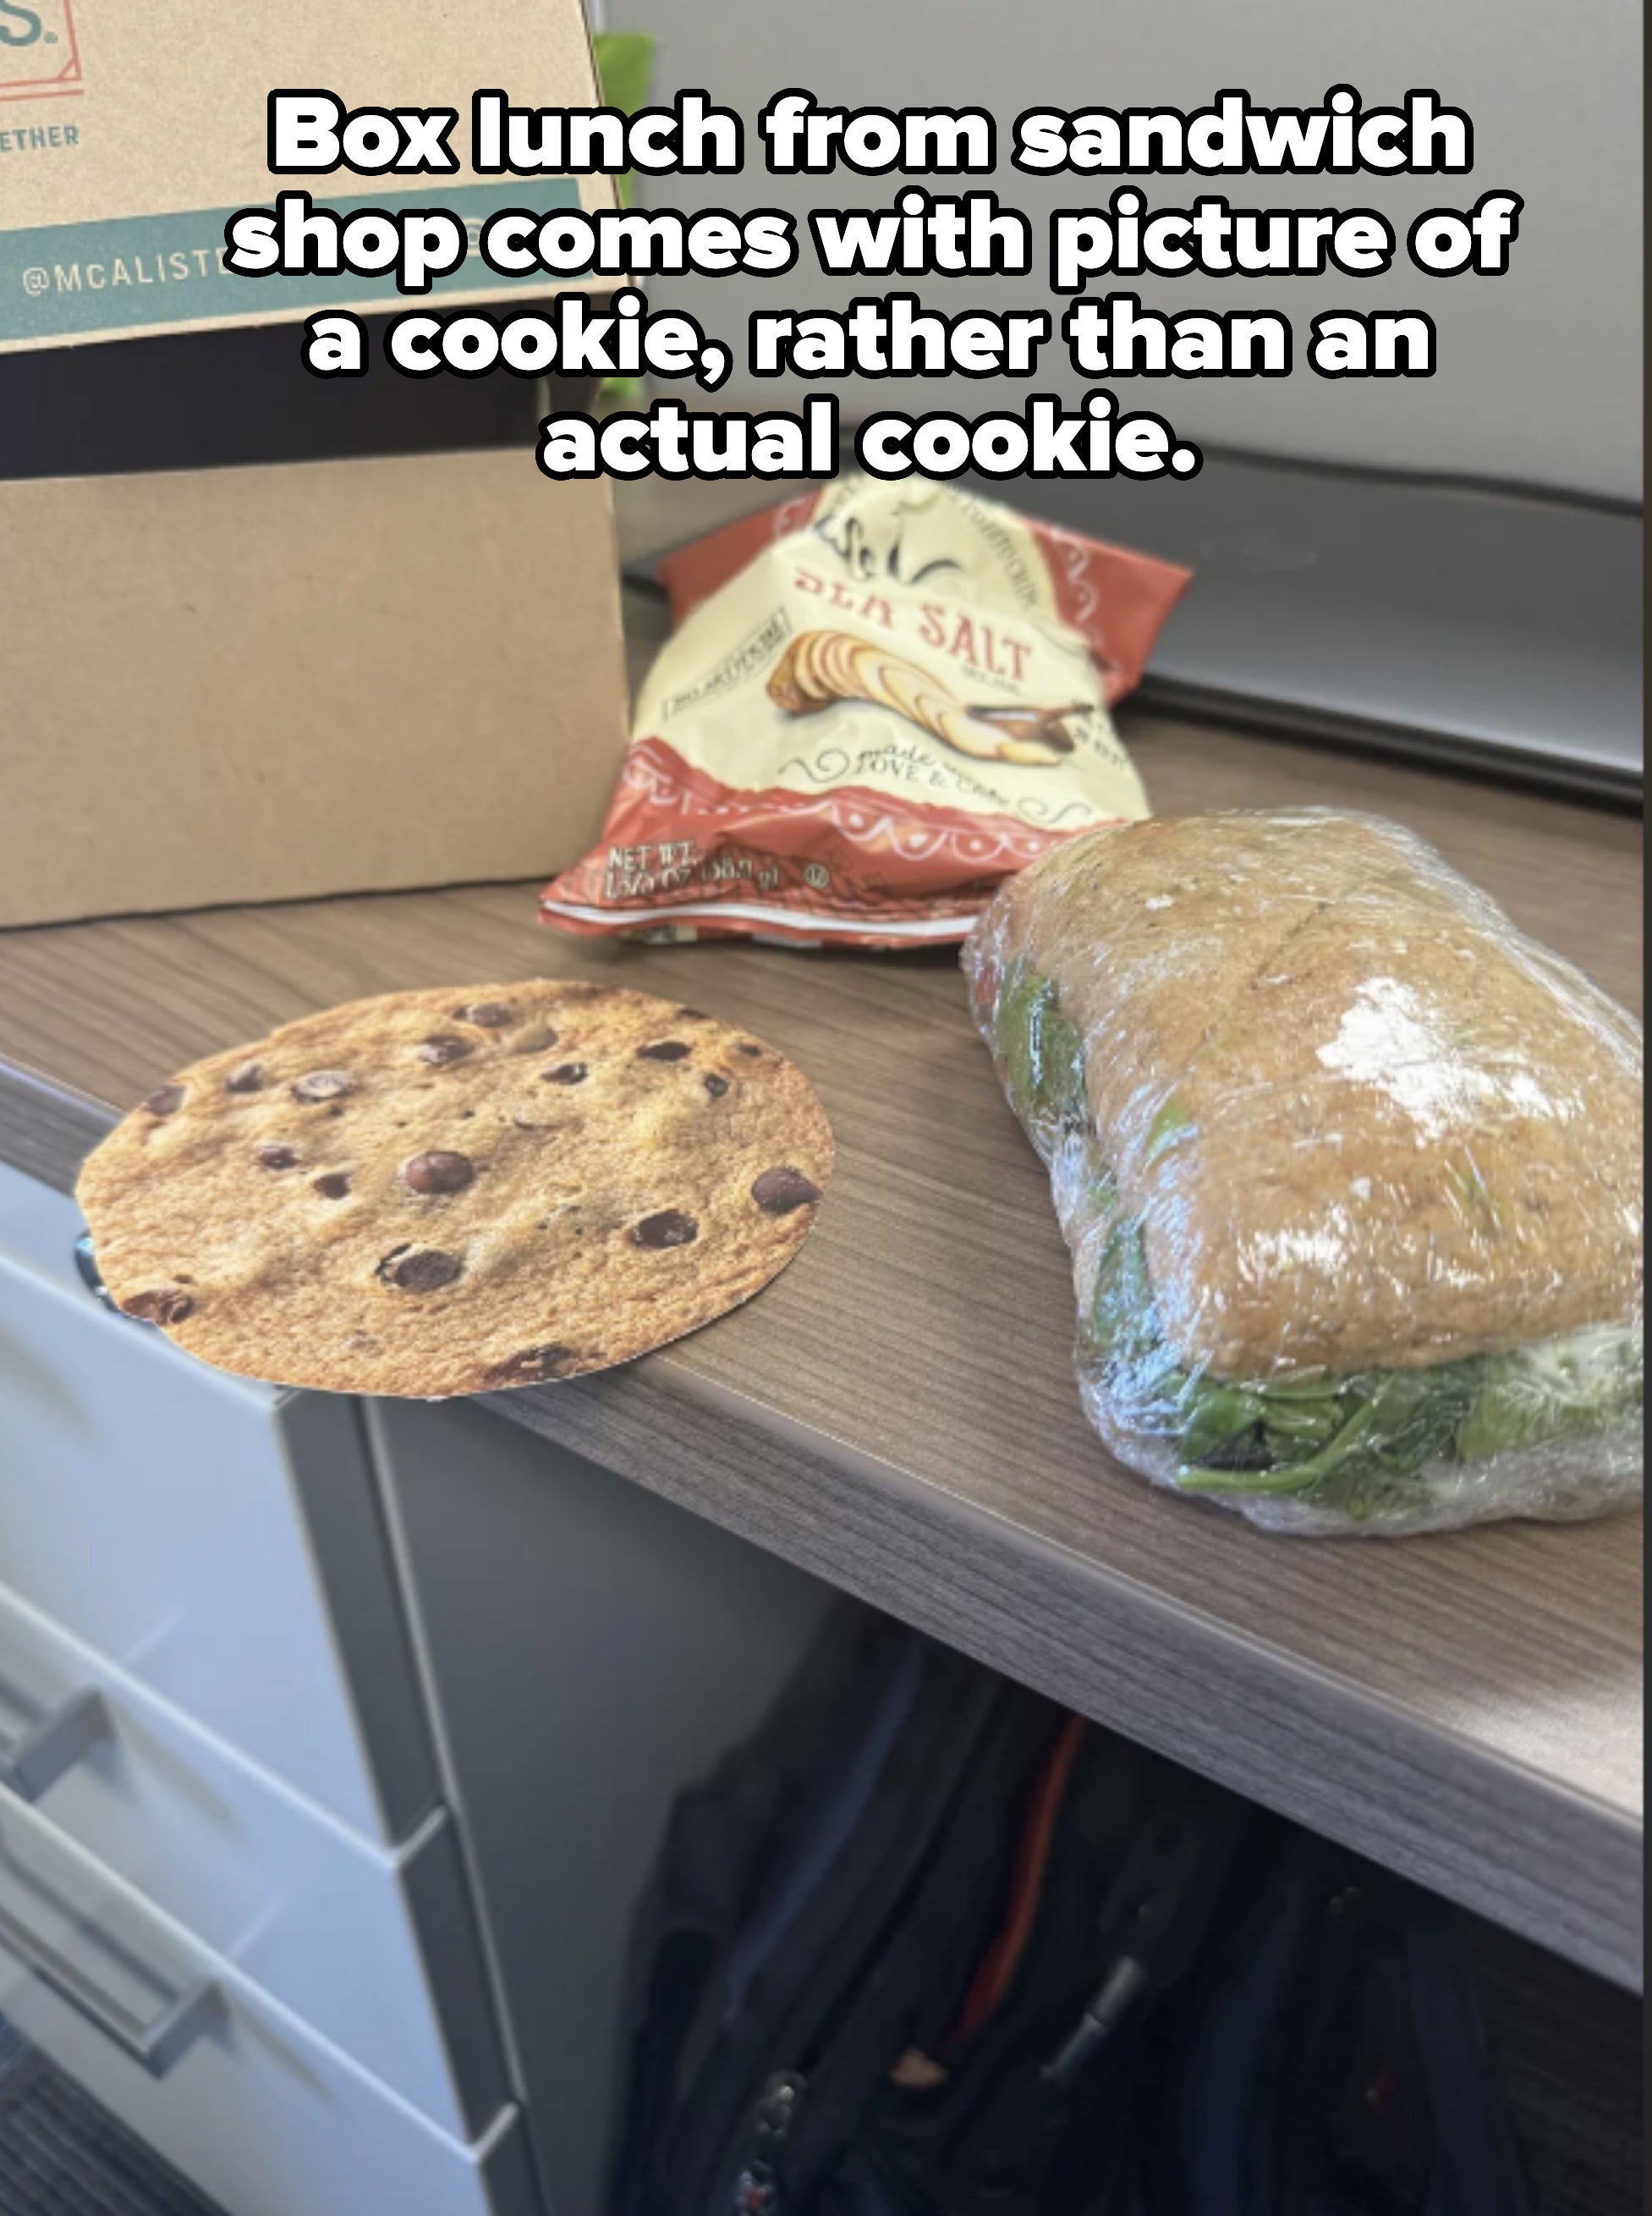 A cookie with chocolate chips, a bag of sea salt chips, and a wrapped sandwich on a desk with a laptop in the background